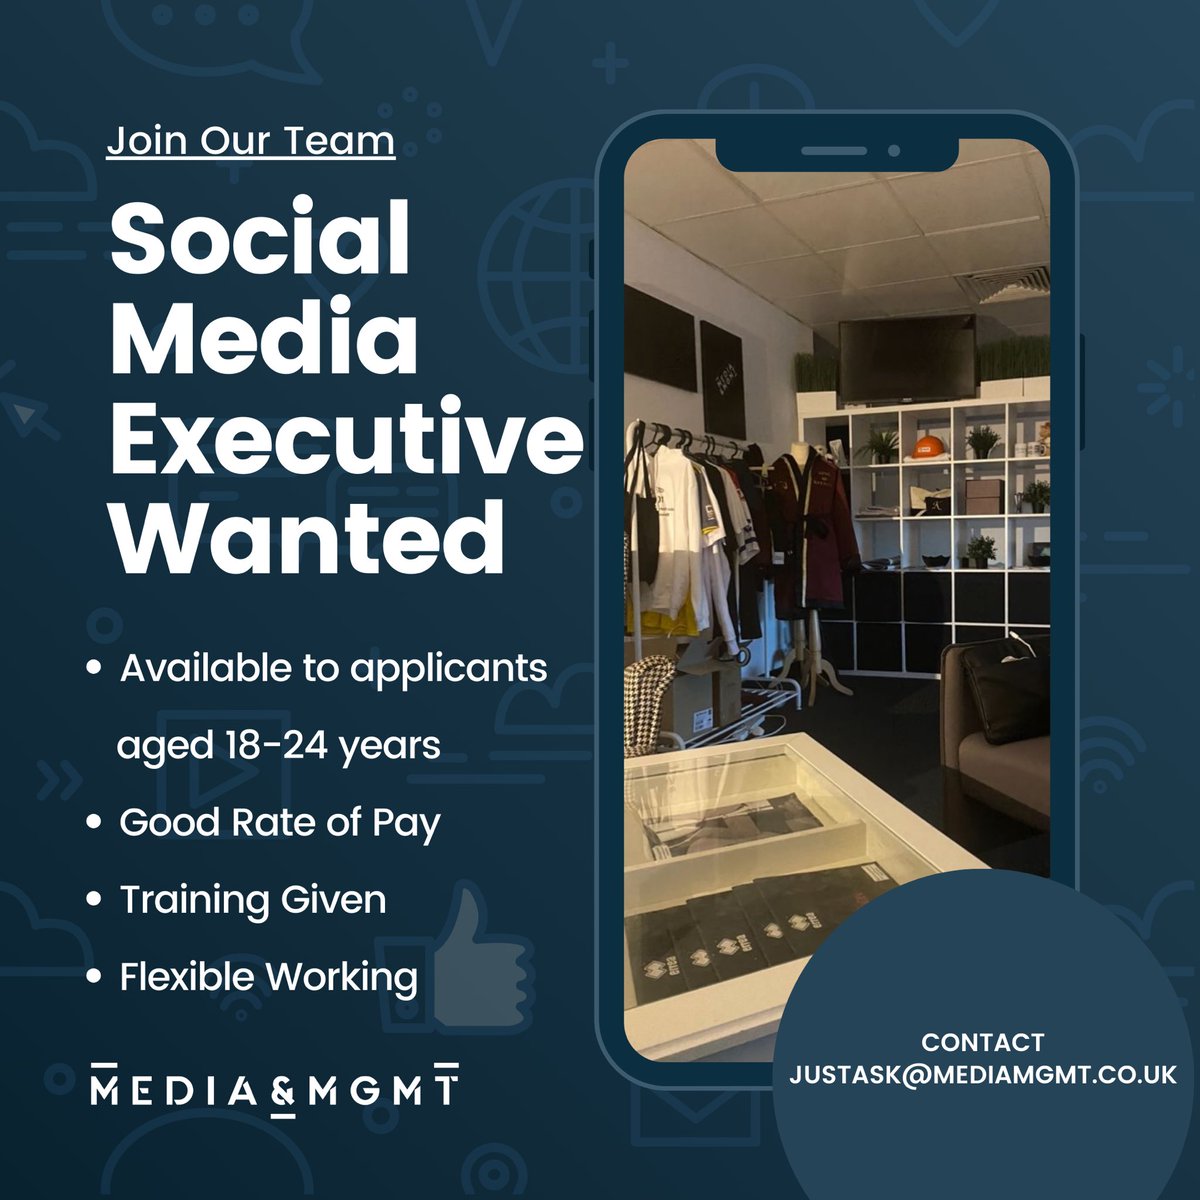 We are looking for a Social Media Executive to join our team. 

The role is available to applicants aged between 18-24 years. 

Training will be given. 
Flexible working. 
Good rates of pay. 

Contact justask@mediamgmt.co.uk 

#socialmedia #socialmediaexecutive #mediamgmt #job